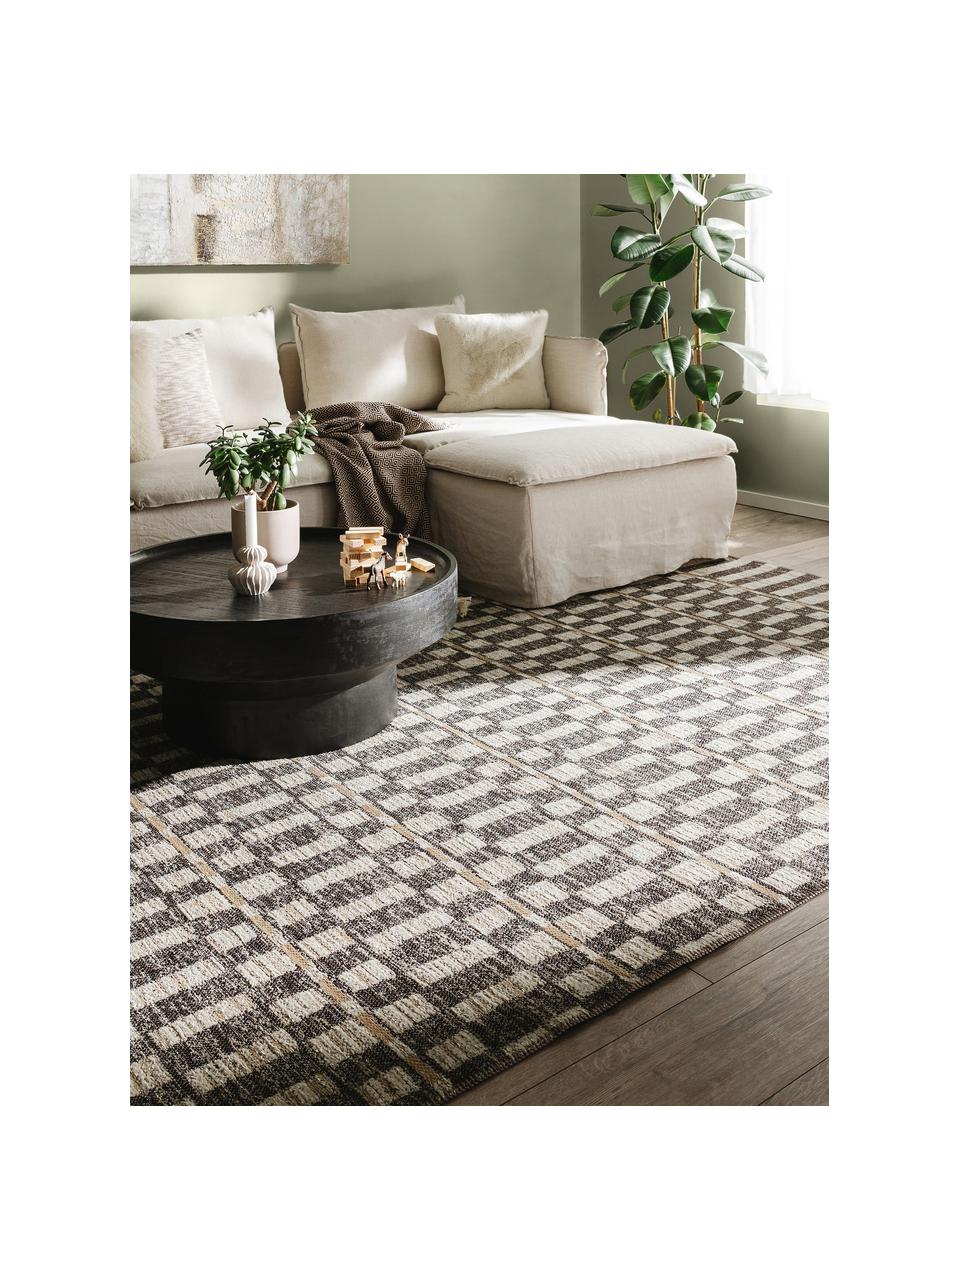 Tapis à motifs Elena, 65 % polyester, 35 % jute, Taupe, beige, larg. 120 x long. 170 cm (taille S)